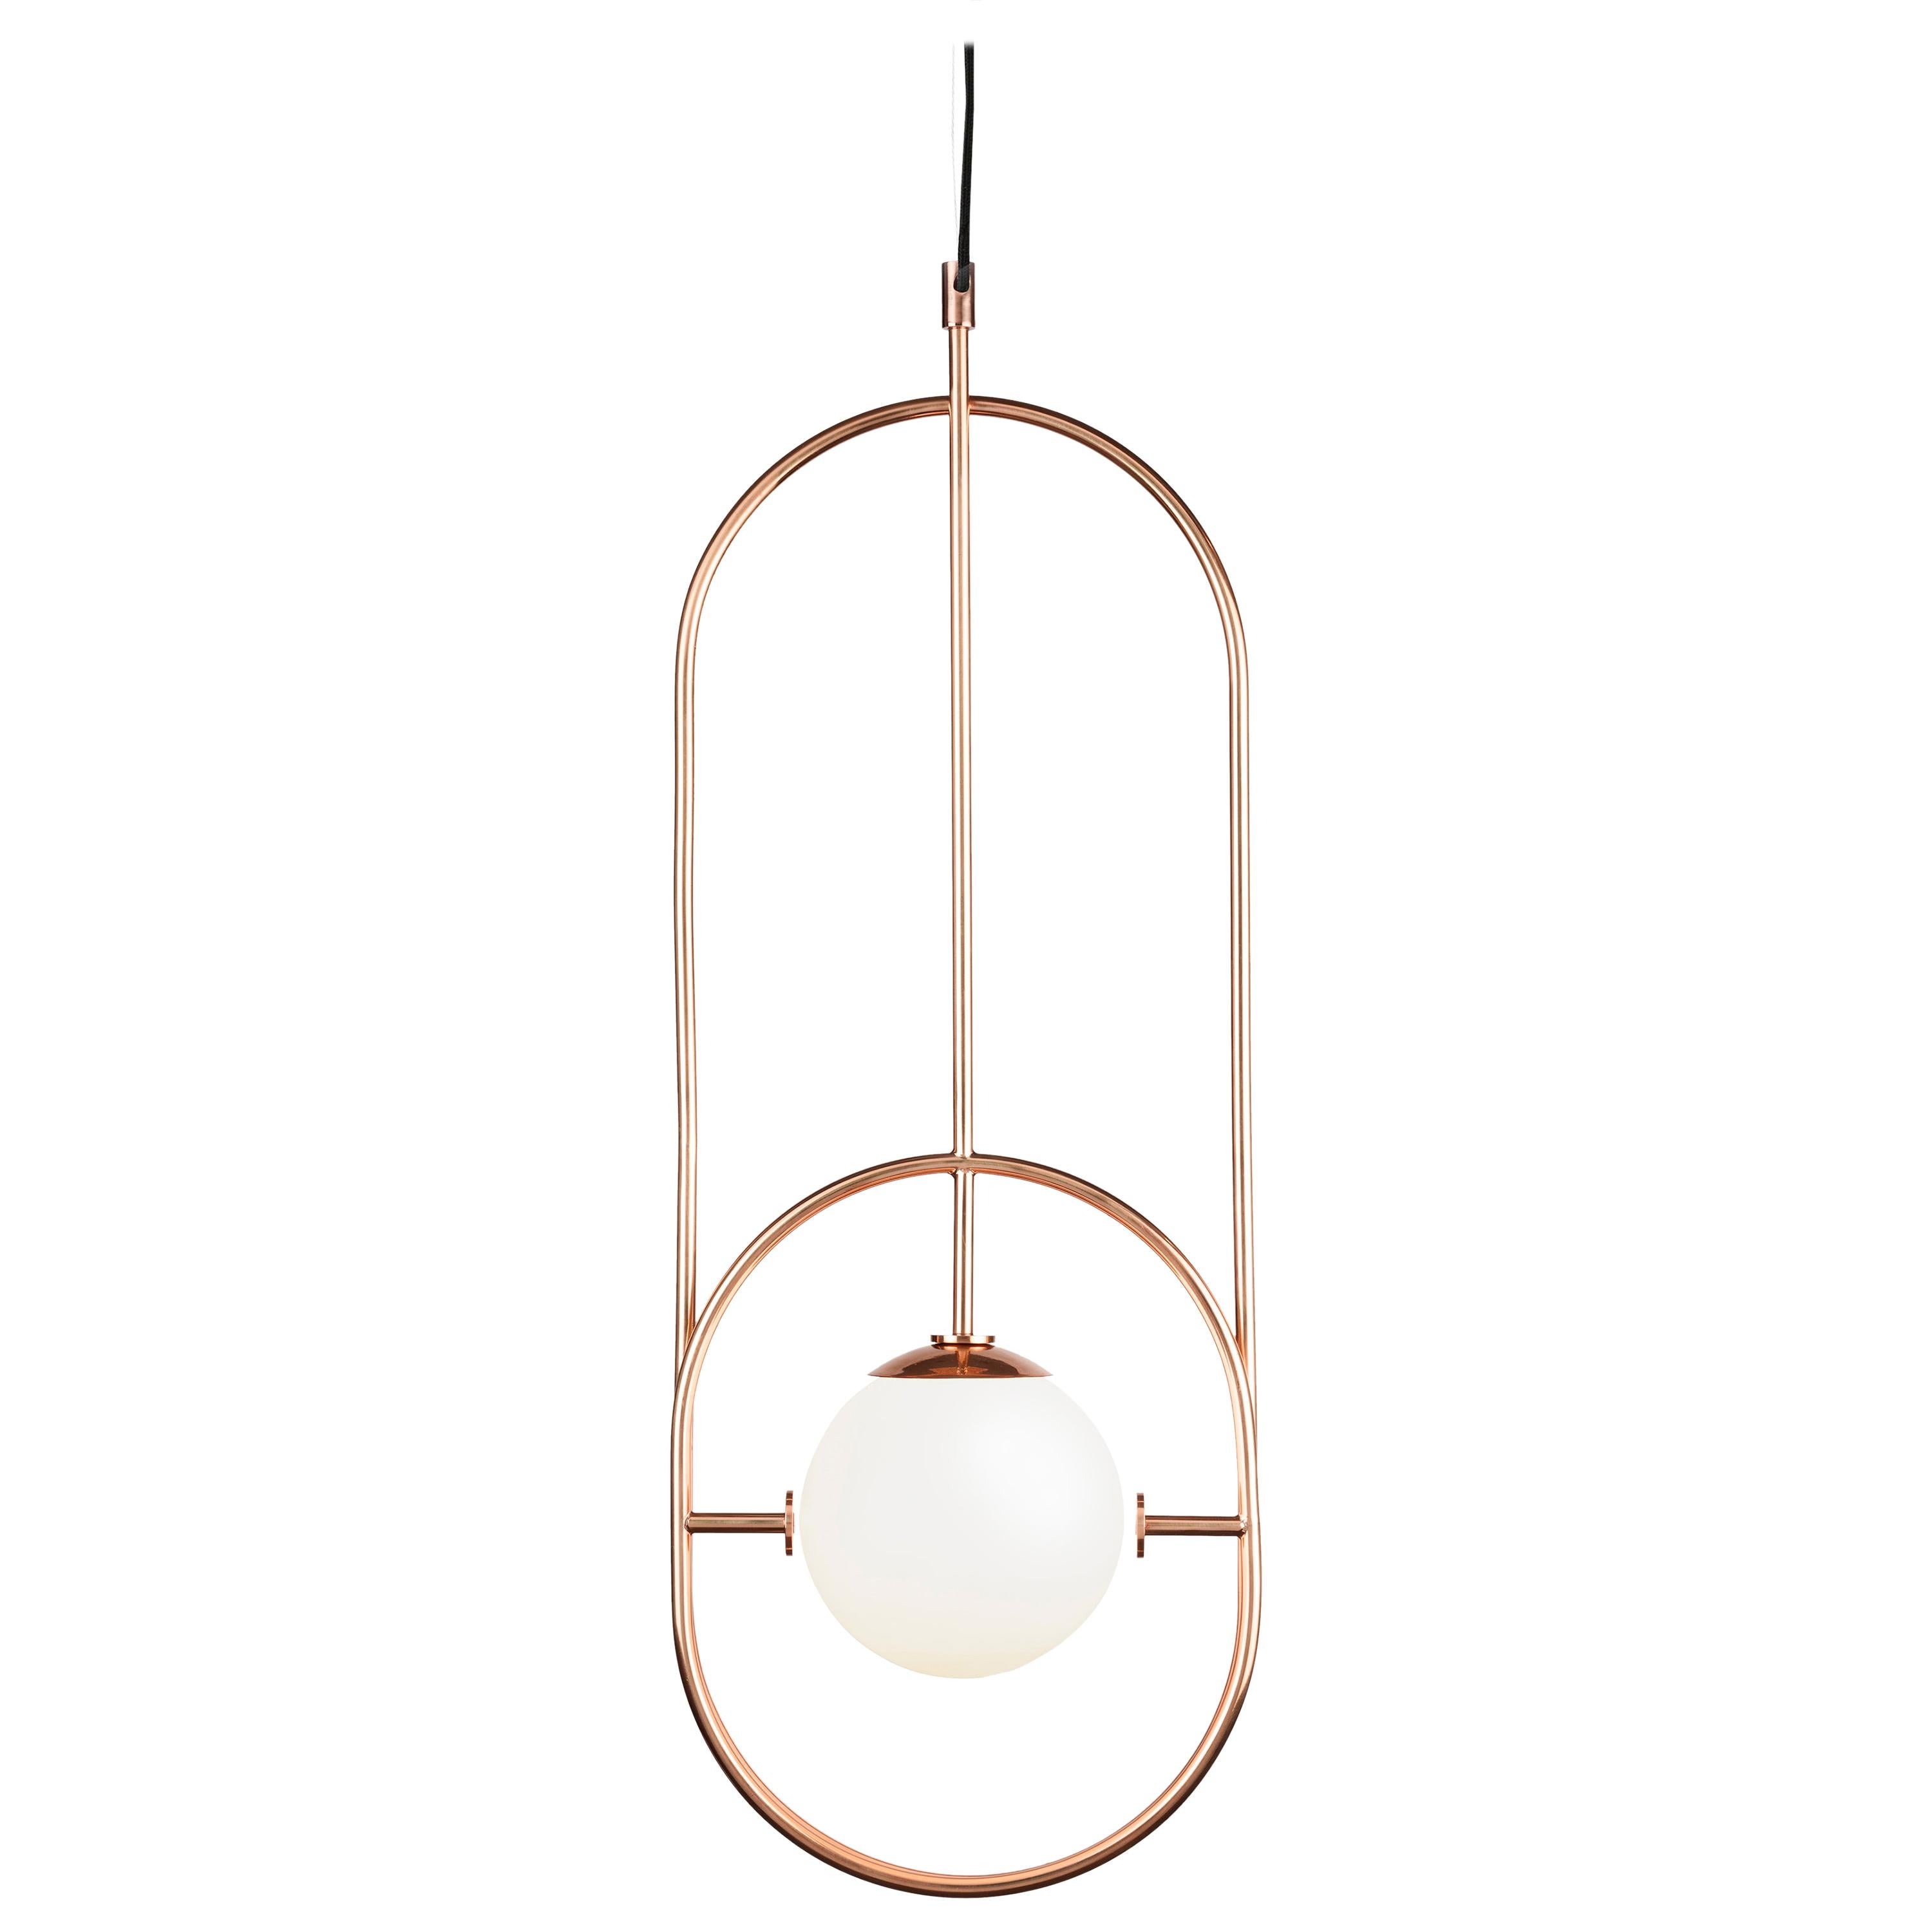 Art Deco inspired Loop I Pendant Lamp in Copper and Opal Glass by Mambo For Sale